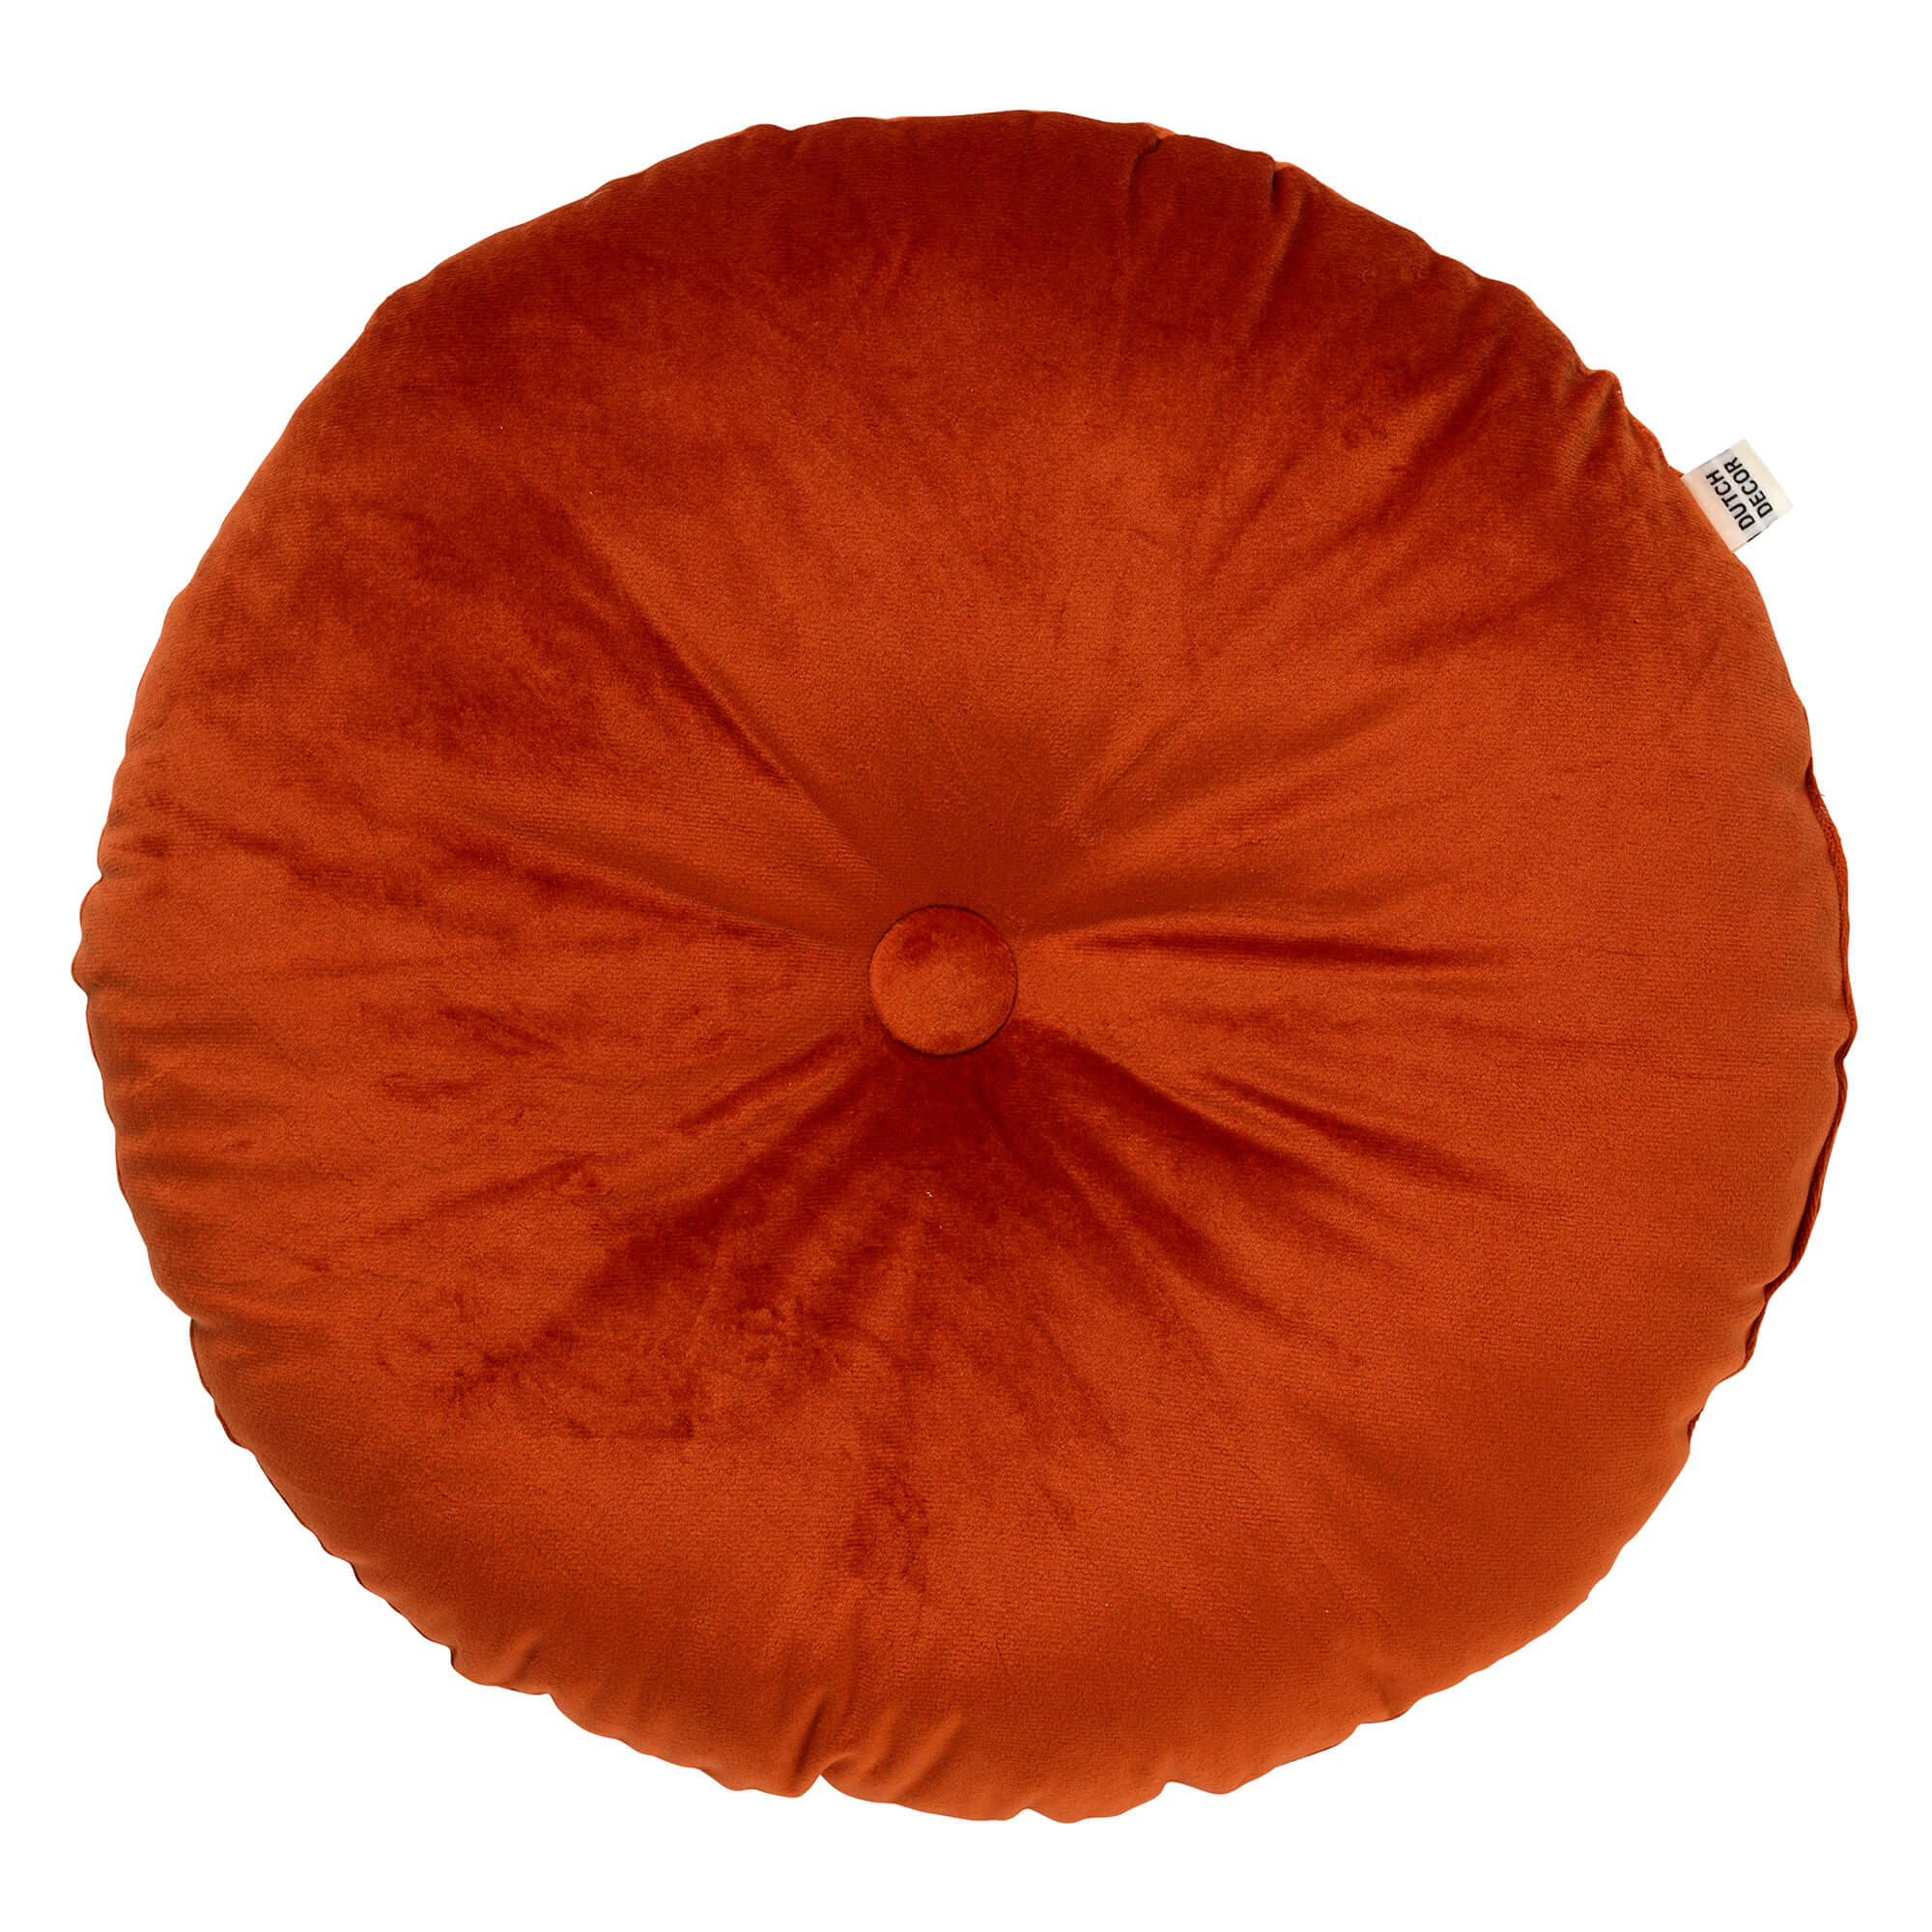 OLLY - Coussin rond en velours Potters Clay 40 cm 